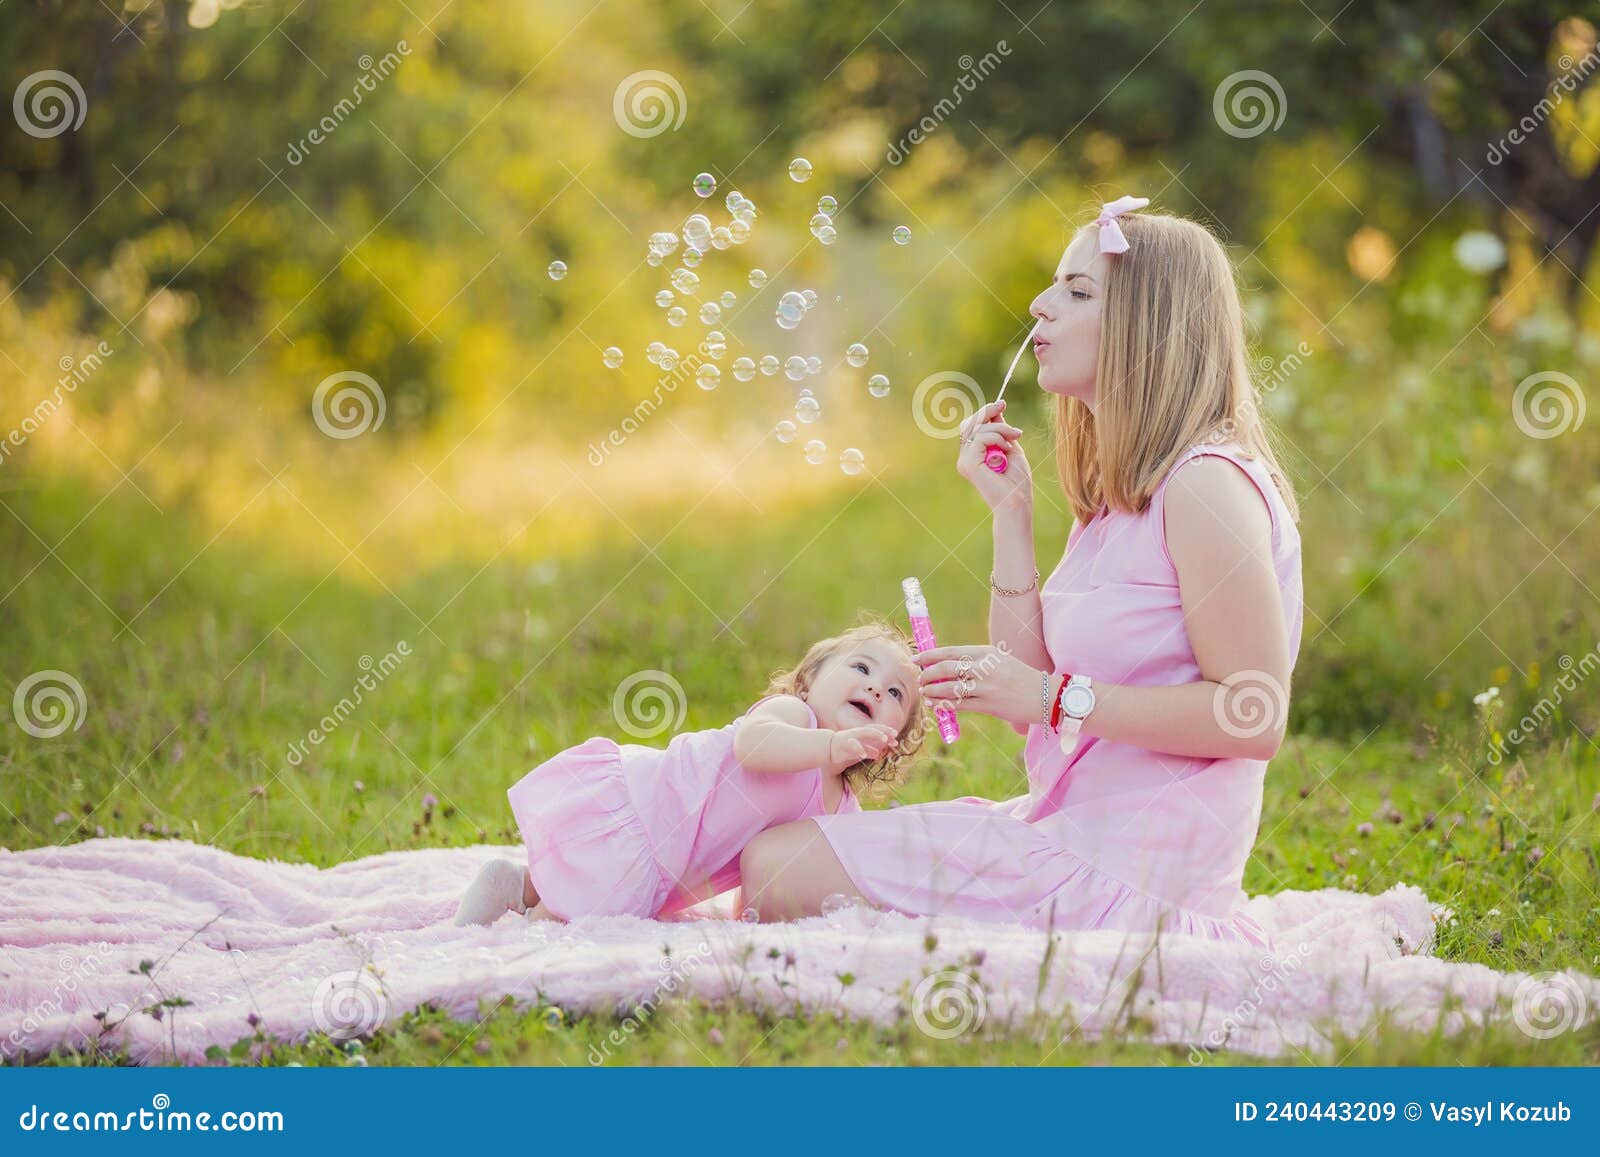 Mother And Daughter Blowing Bubbles Stock Image Image Of Blow